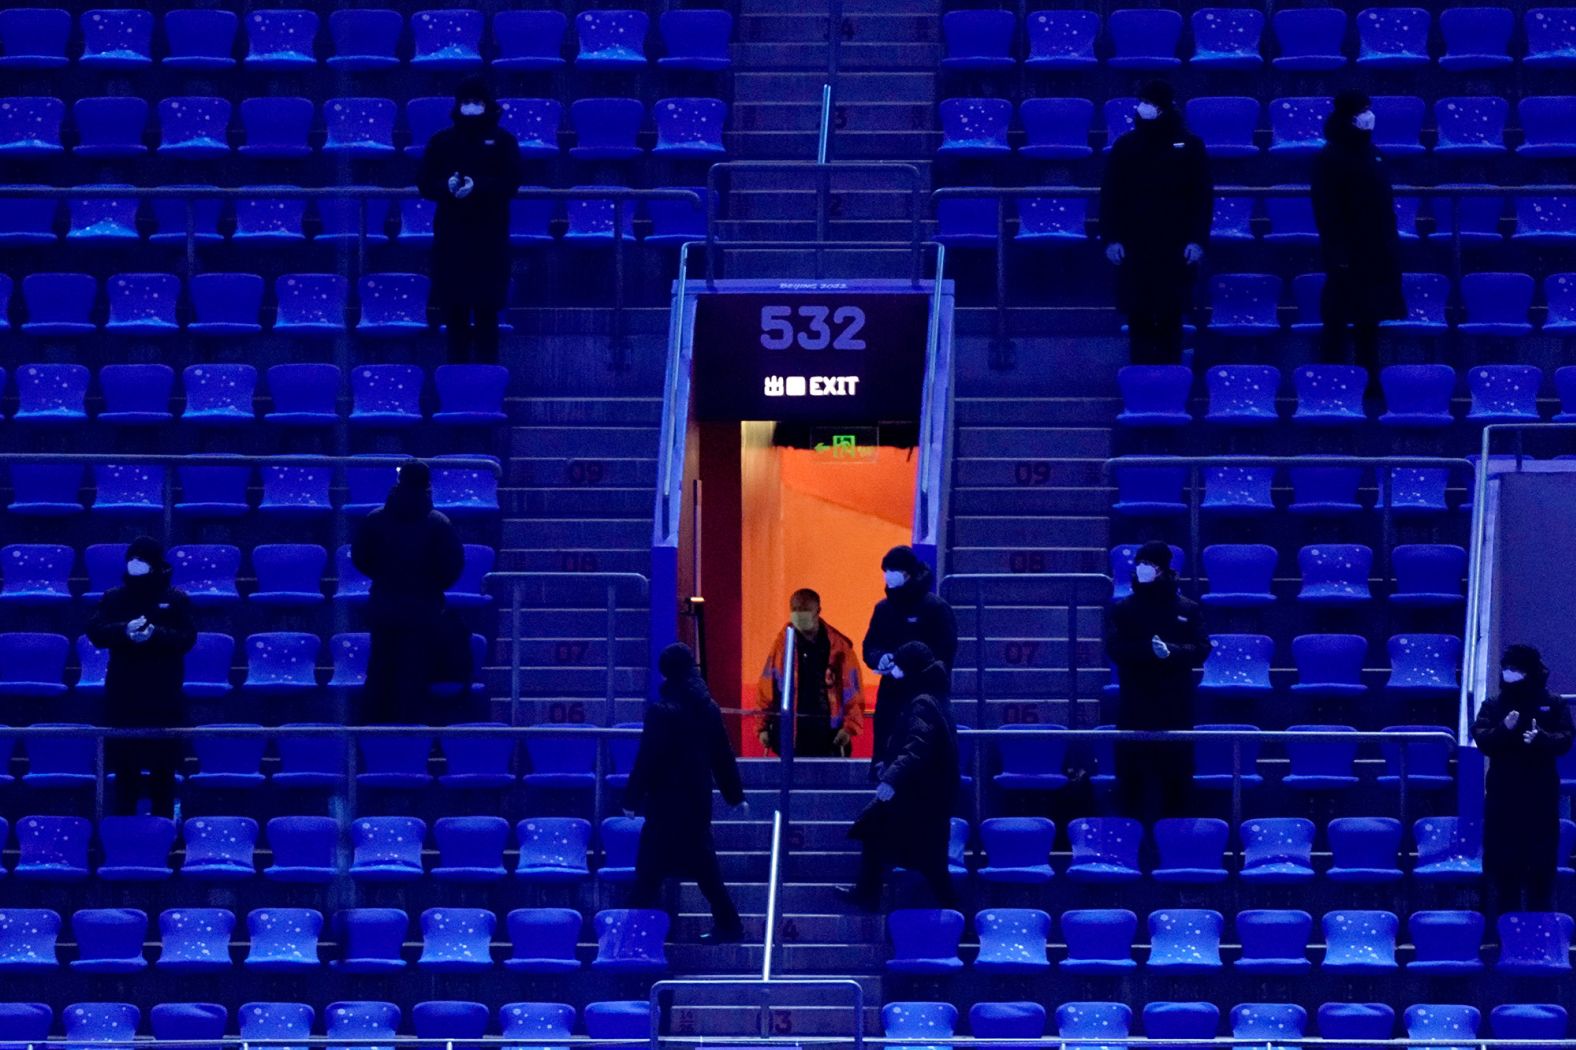 Security personnel stand guard inside the stadium.